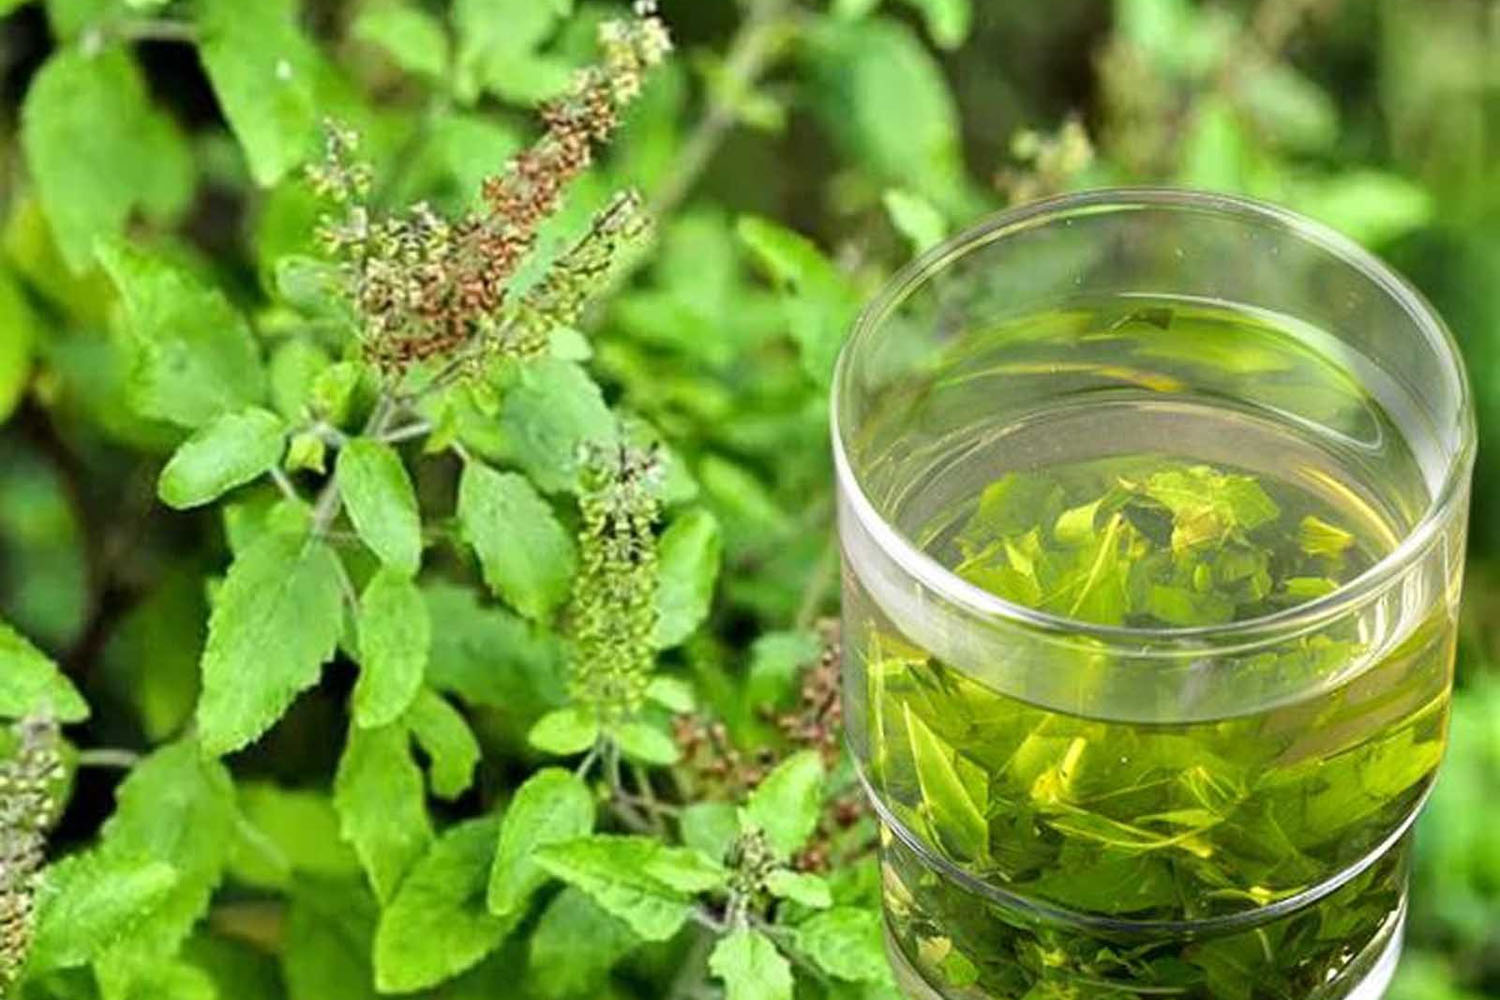 This remedy of Tulsi water is very miraculous, luck will wake up in no time